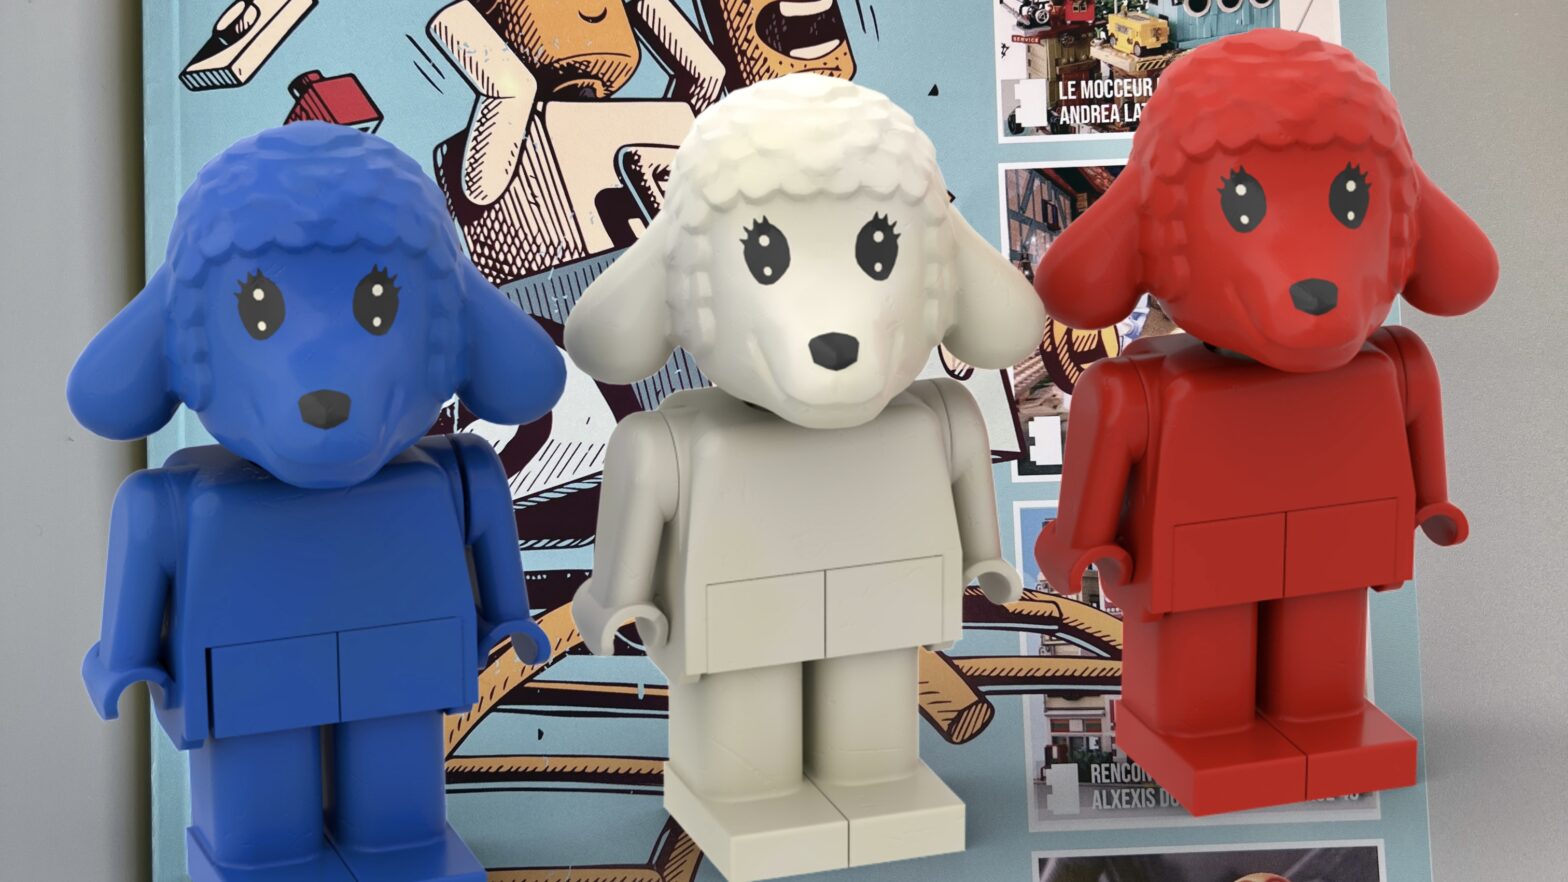 Three Lego lambs (blue, white & red) and new Briques magazine cover.